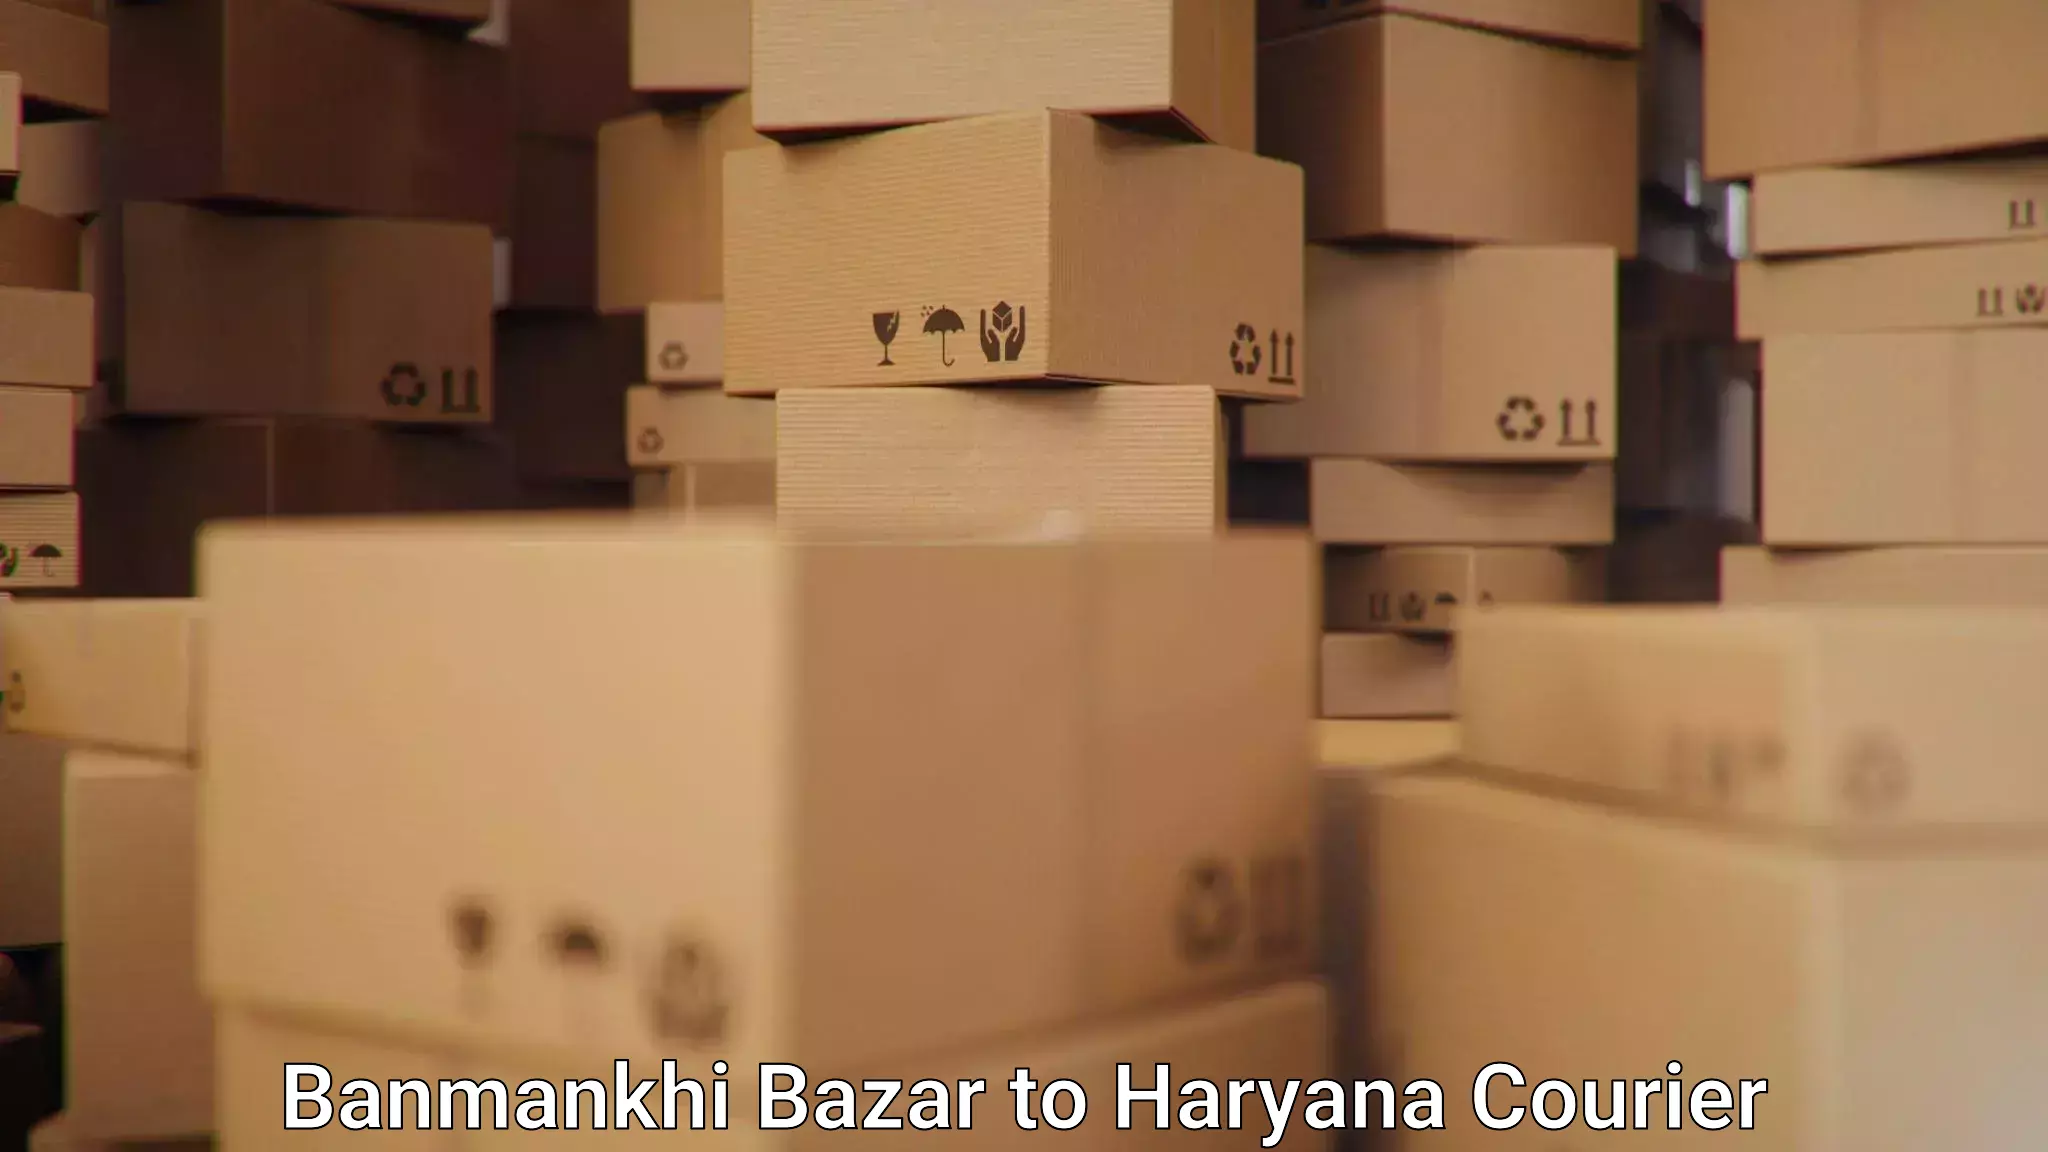 Global shipping networks in Banmankhi Bazar to Haryana